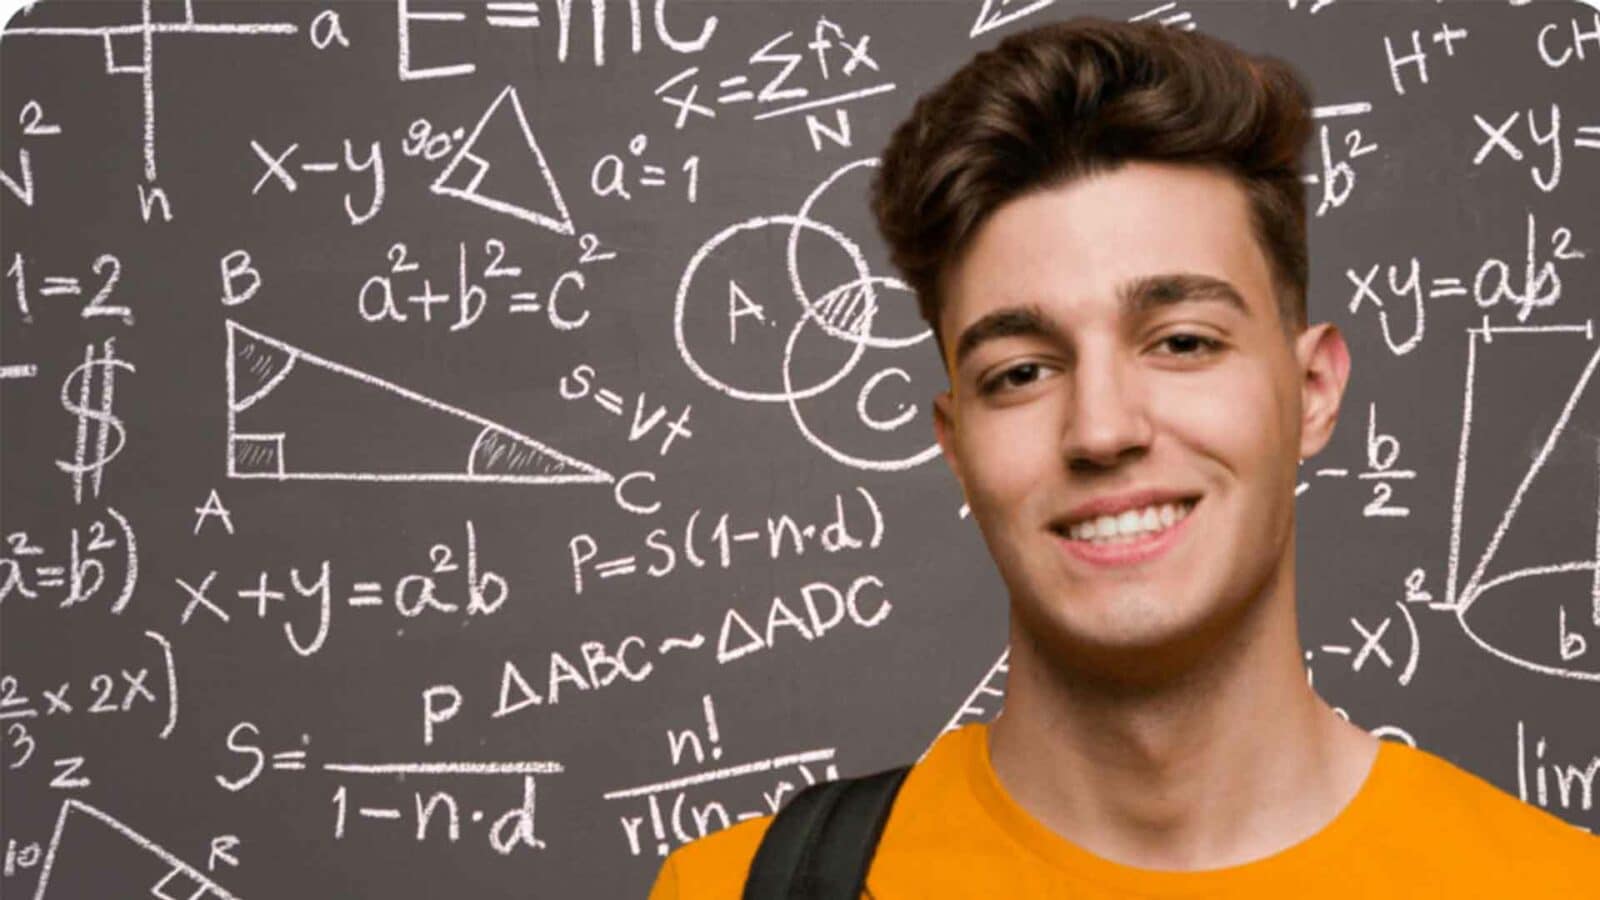 Teen with math problems on chalkboard behind him